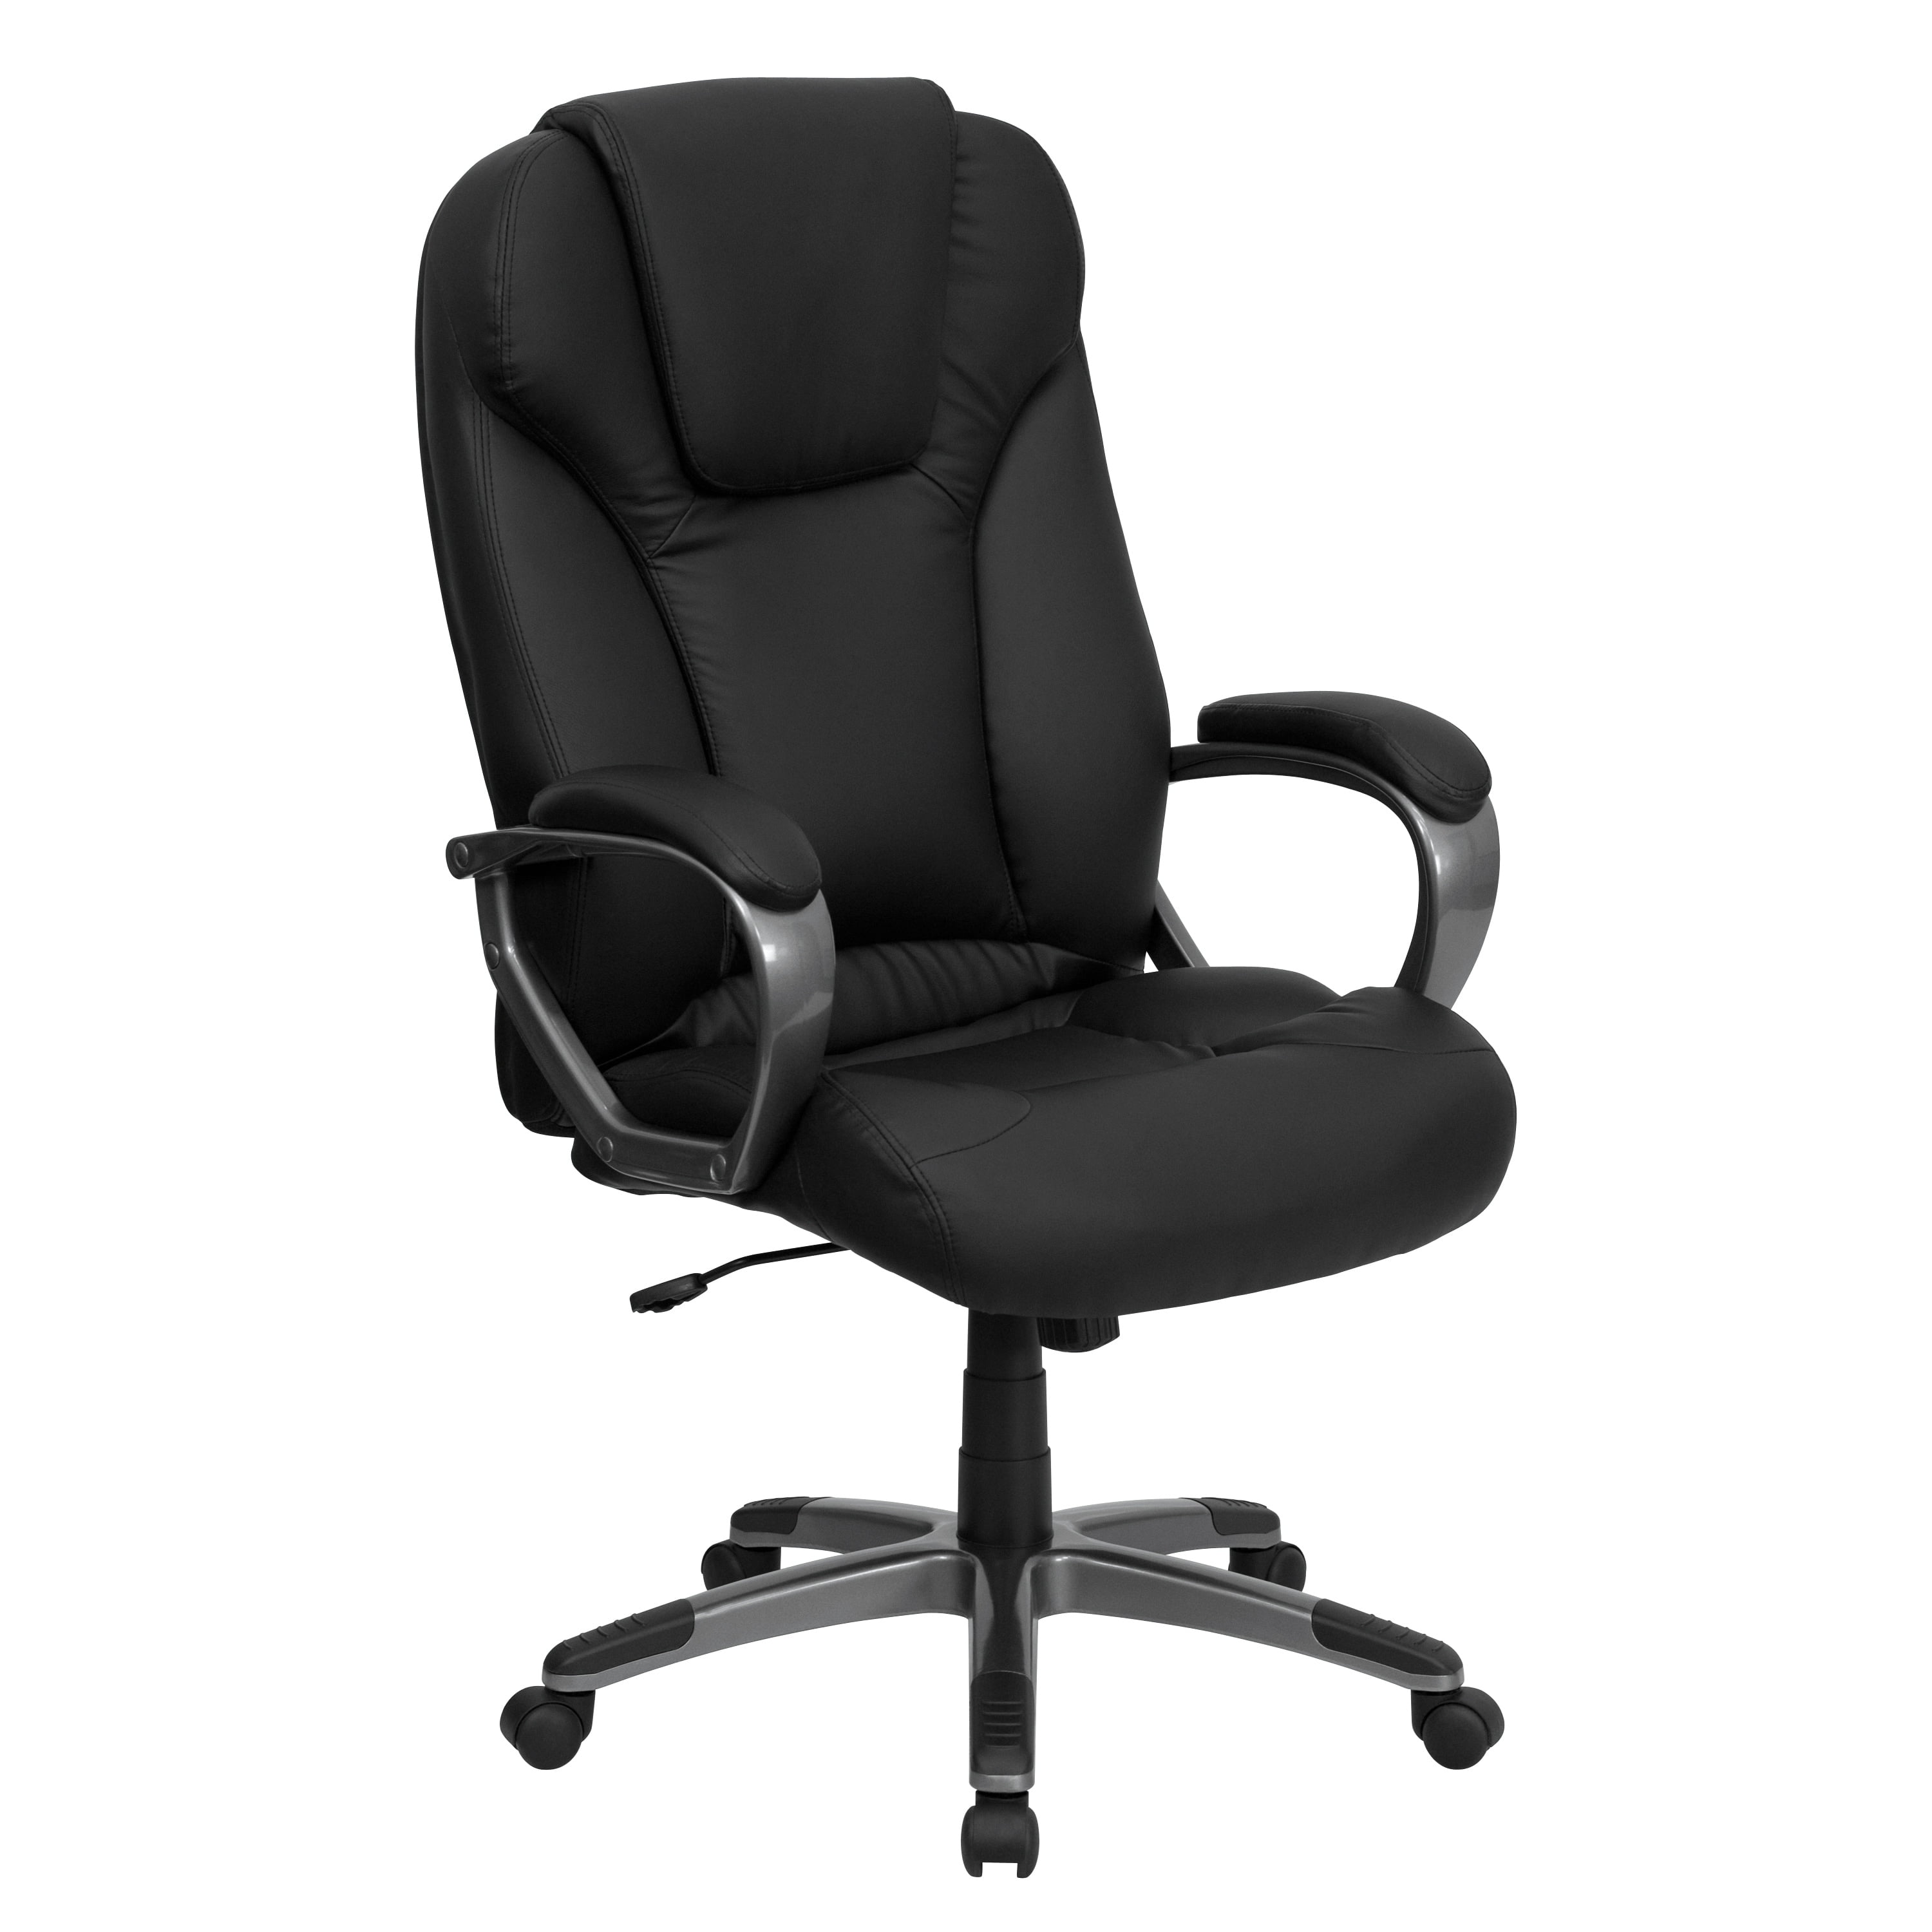 Lancaster Home Executive High-back Black Leather Office Chair - Walmart.com